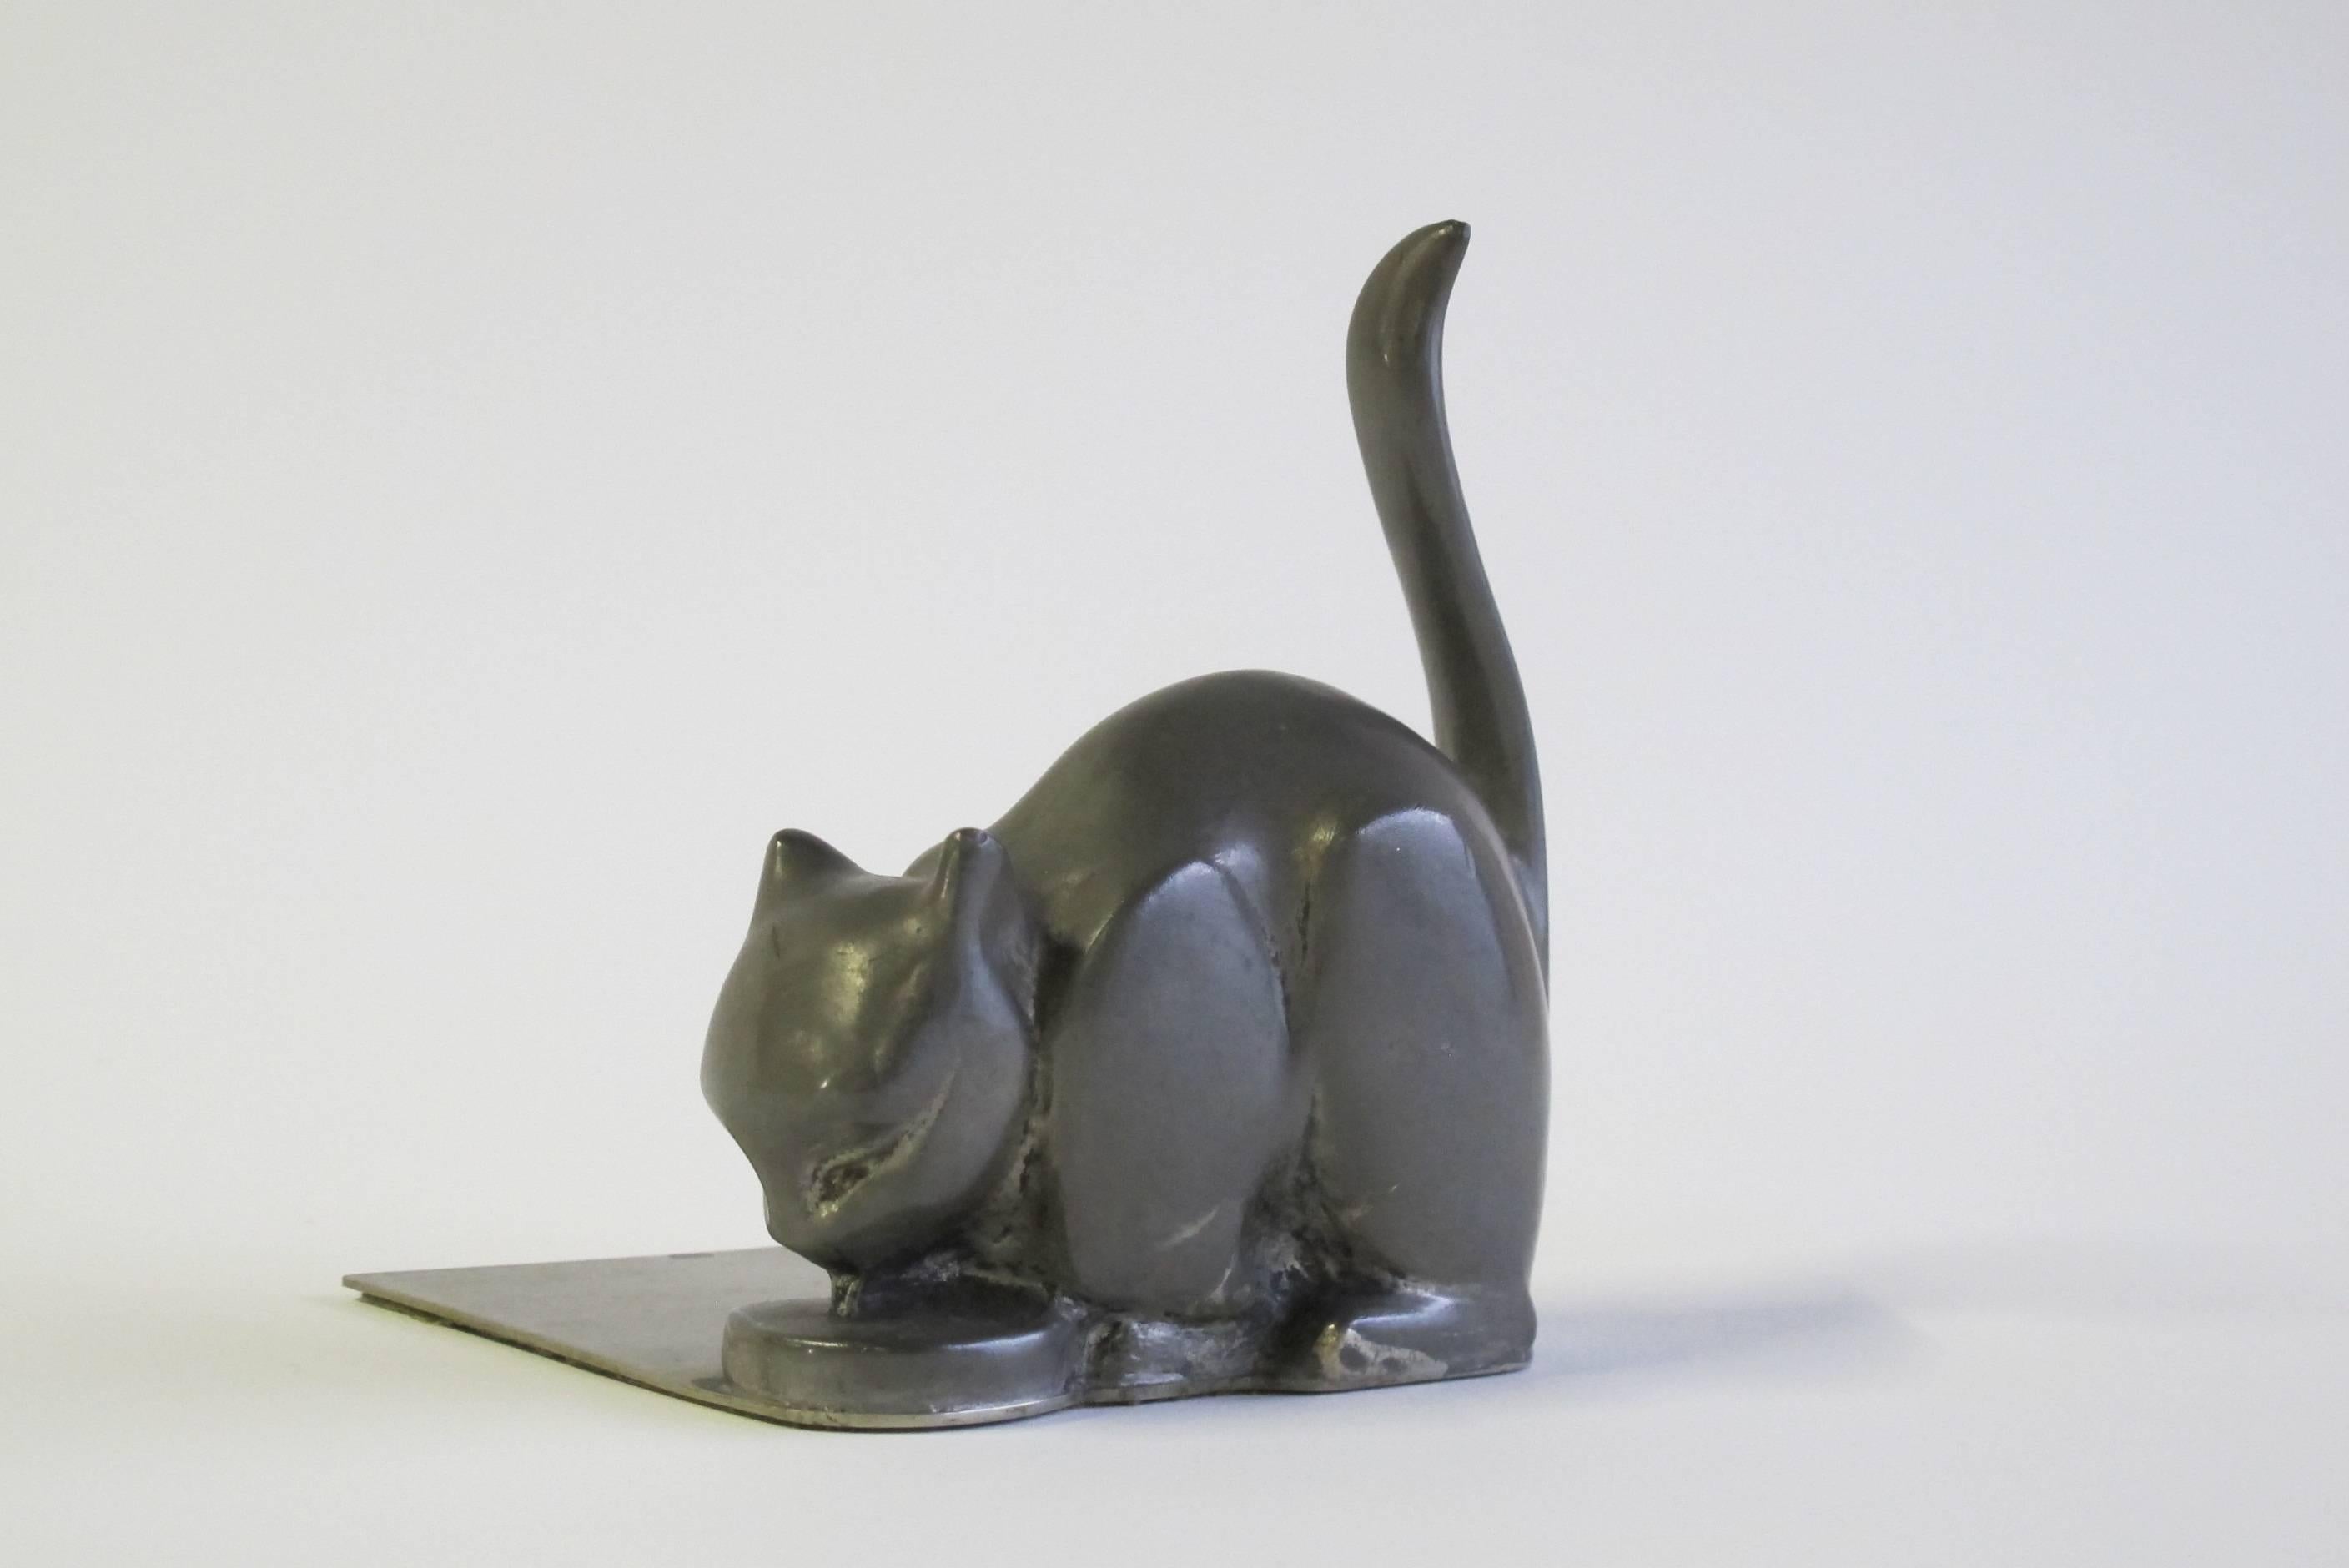 Two lovely Art Deco bookends, designed by Chris van der Hoef for Gero in Zeist. The tin bookends show two cats drinking from their bowls. The bookends are both marked with the manufacturers mark at the end of the plates and monogrammed with the